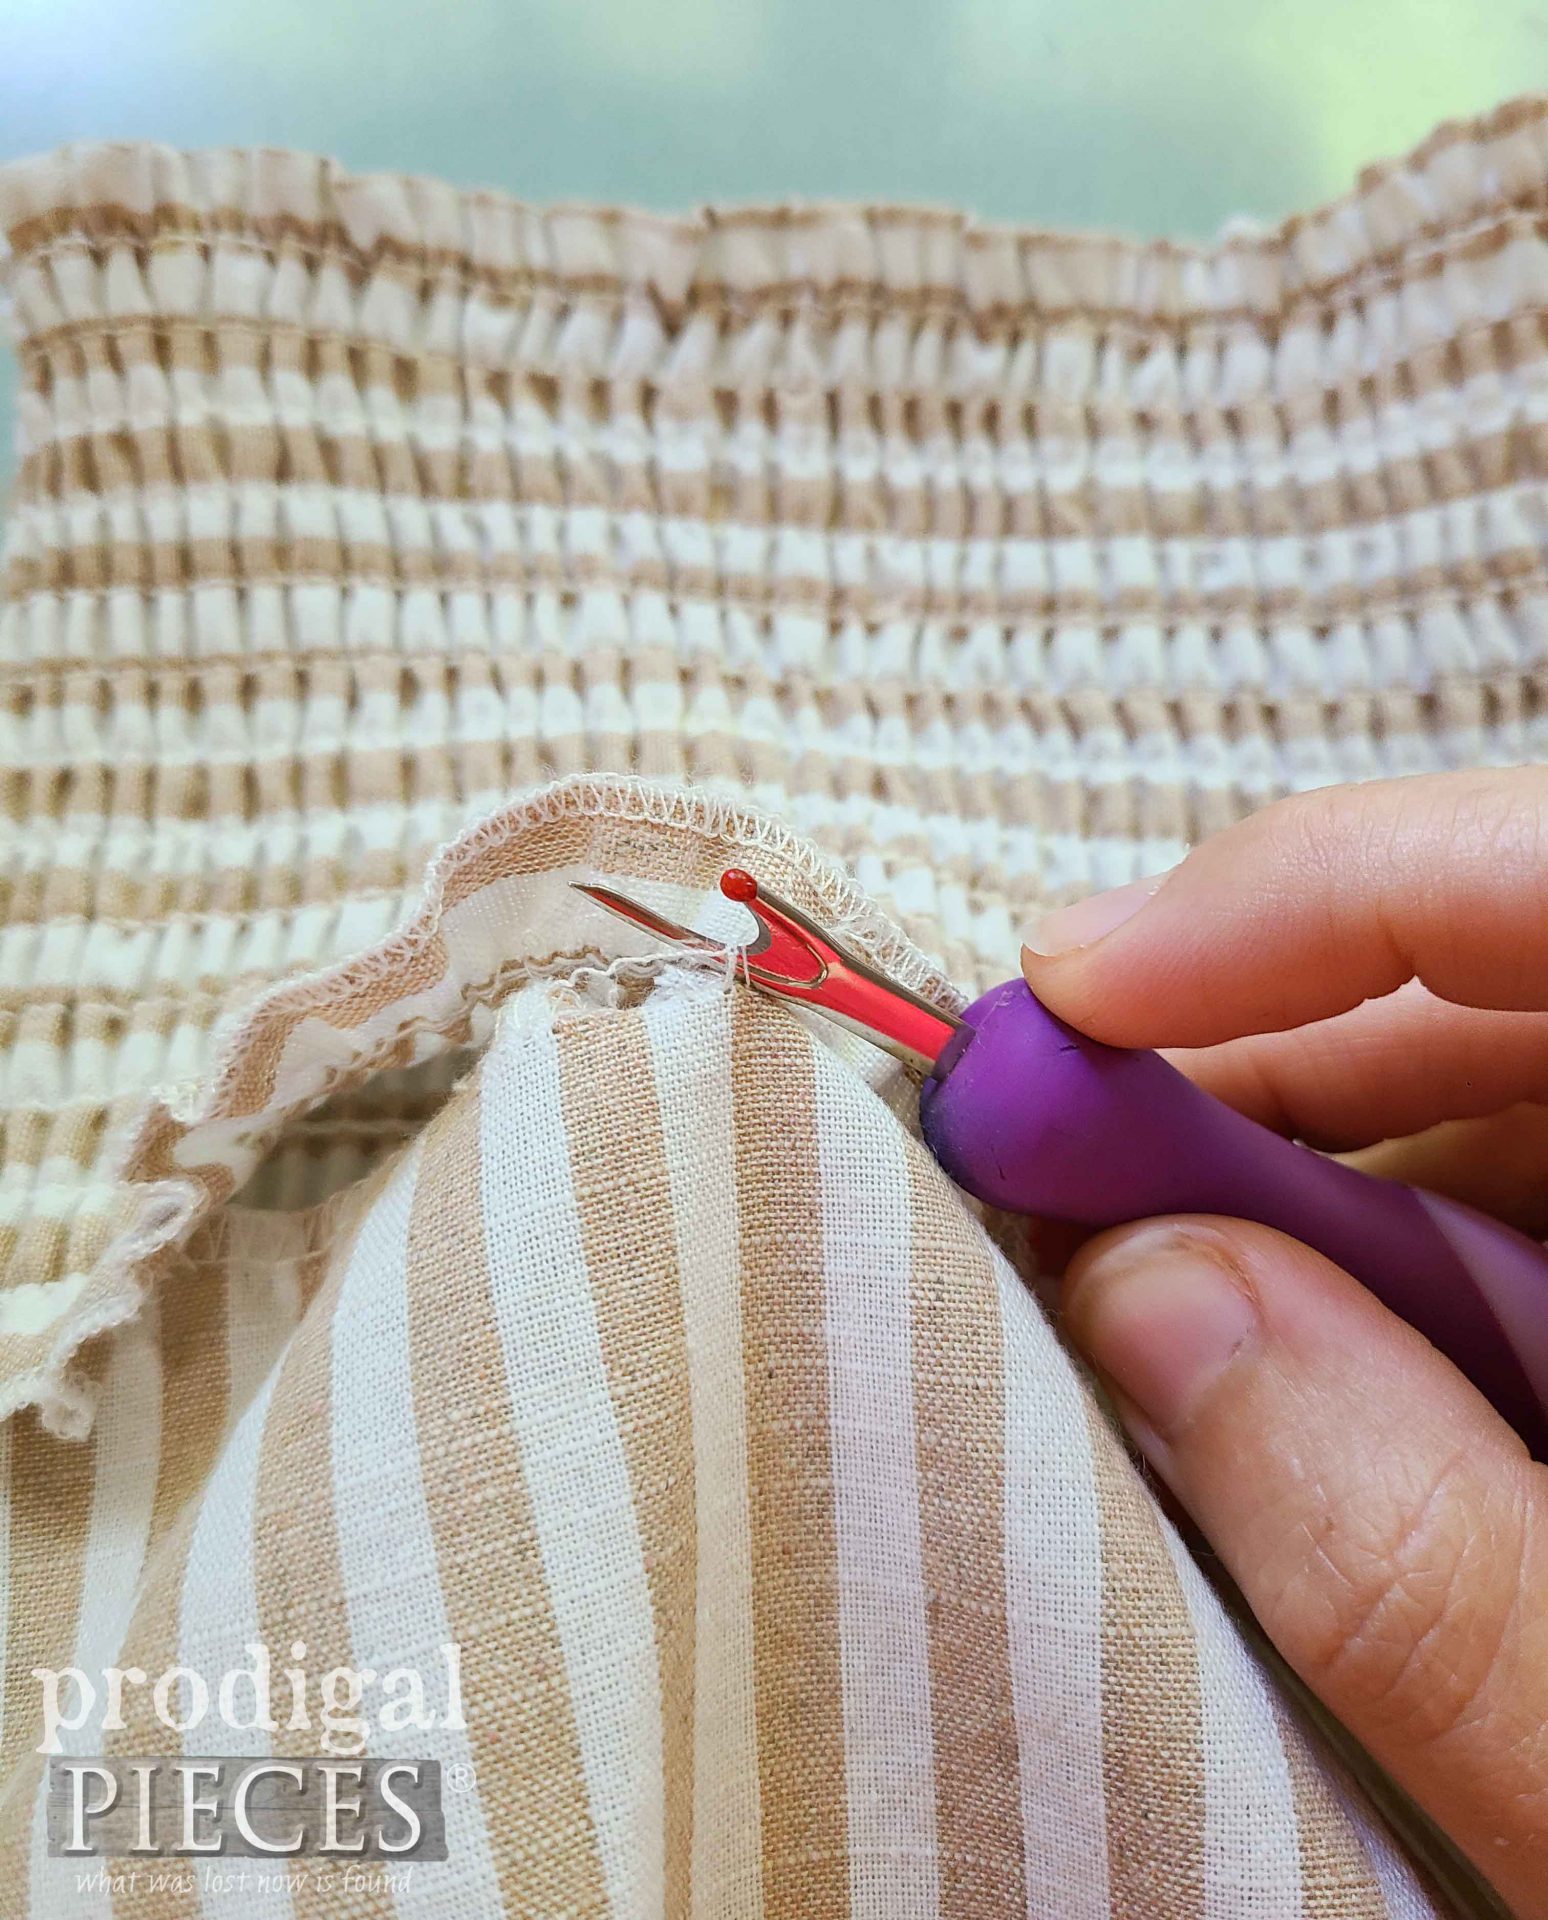 Seam Ripping Refashioned Pants into Ladies' Smocked Blouse | prodigalpieces.com